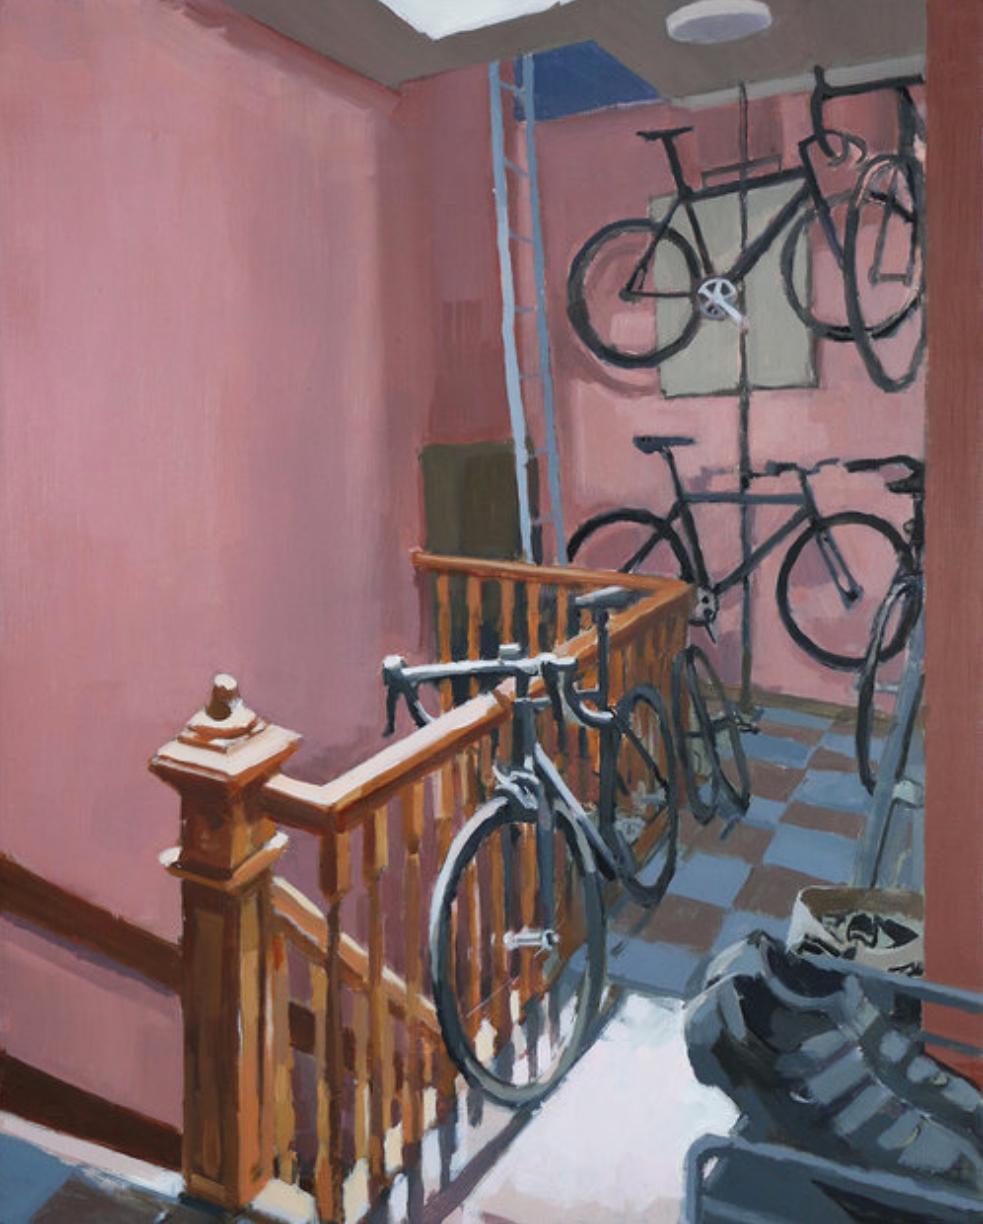 Aaron Hauck Interior Painting - "Entry Bikes" Oil painting on wood panel, figurative interior entryway bicycles